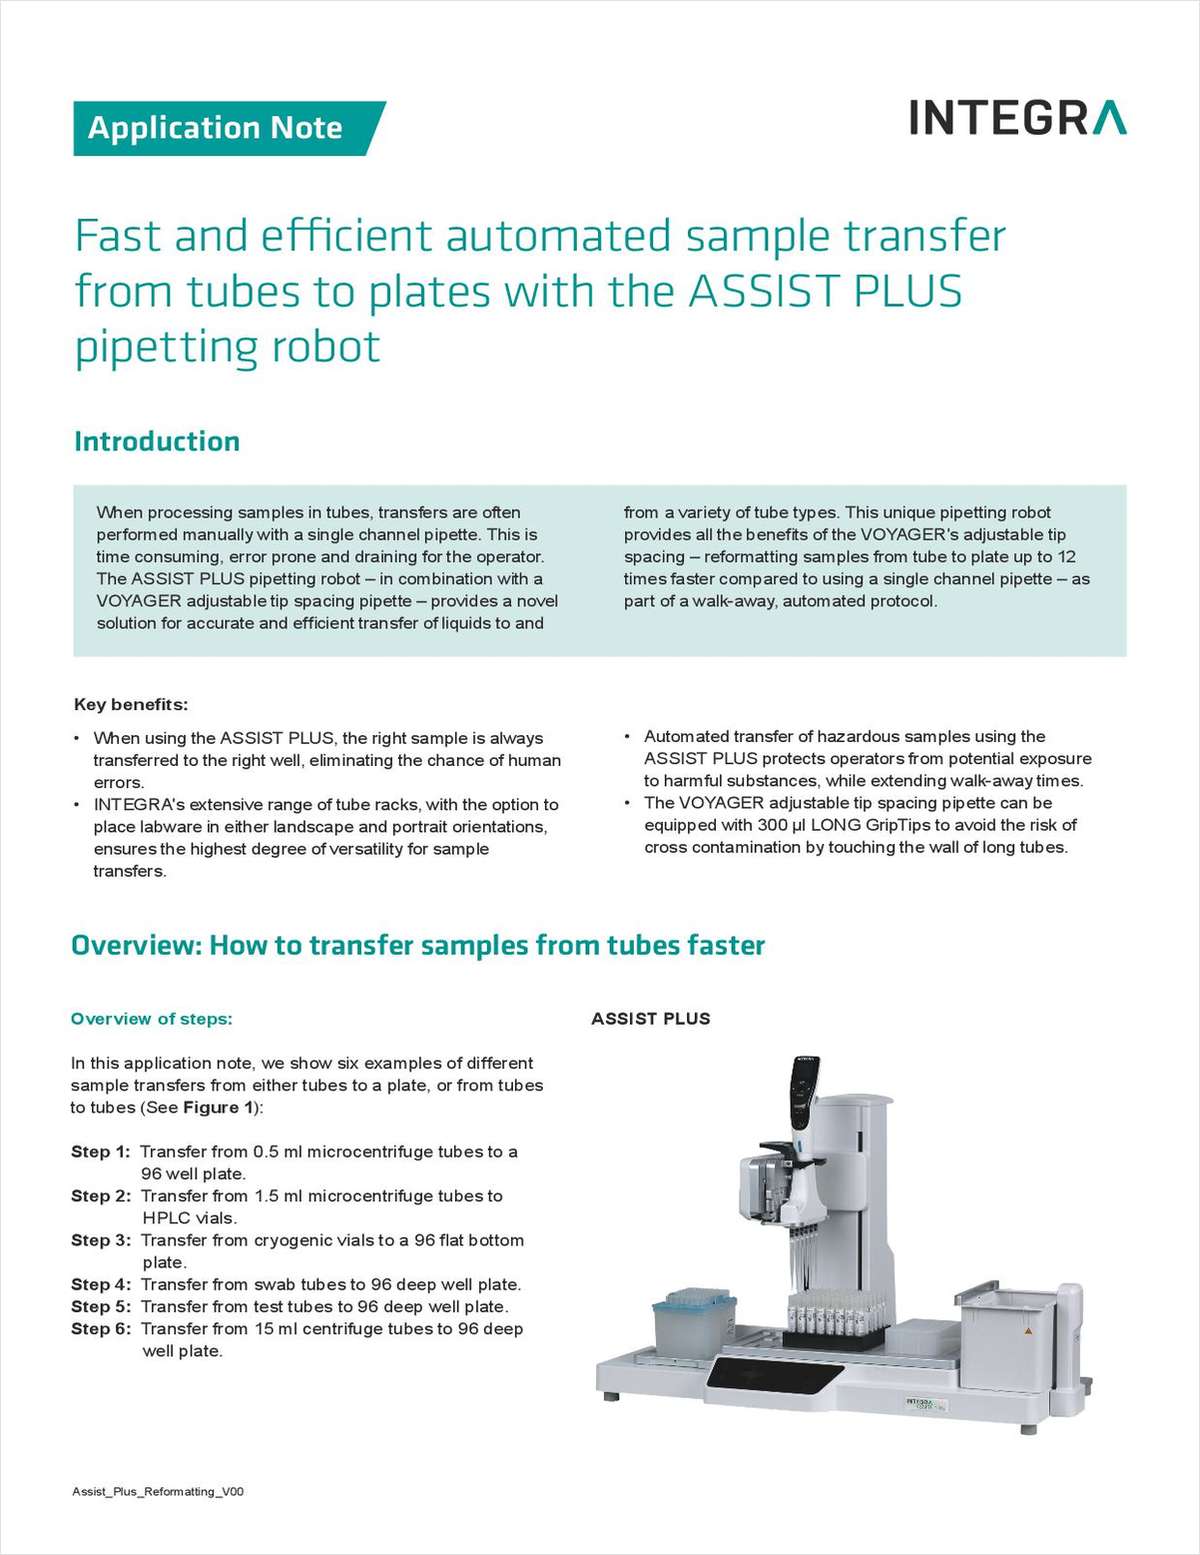 Fast and Efficient Automated Sample Transfer from Tubes to Plates with the Assist Plus Pipetting Robot